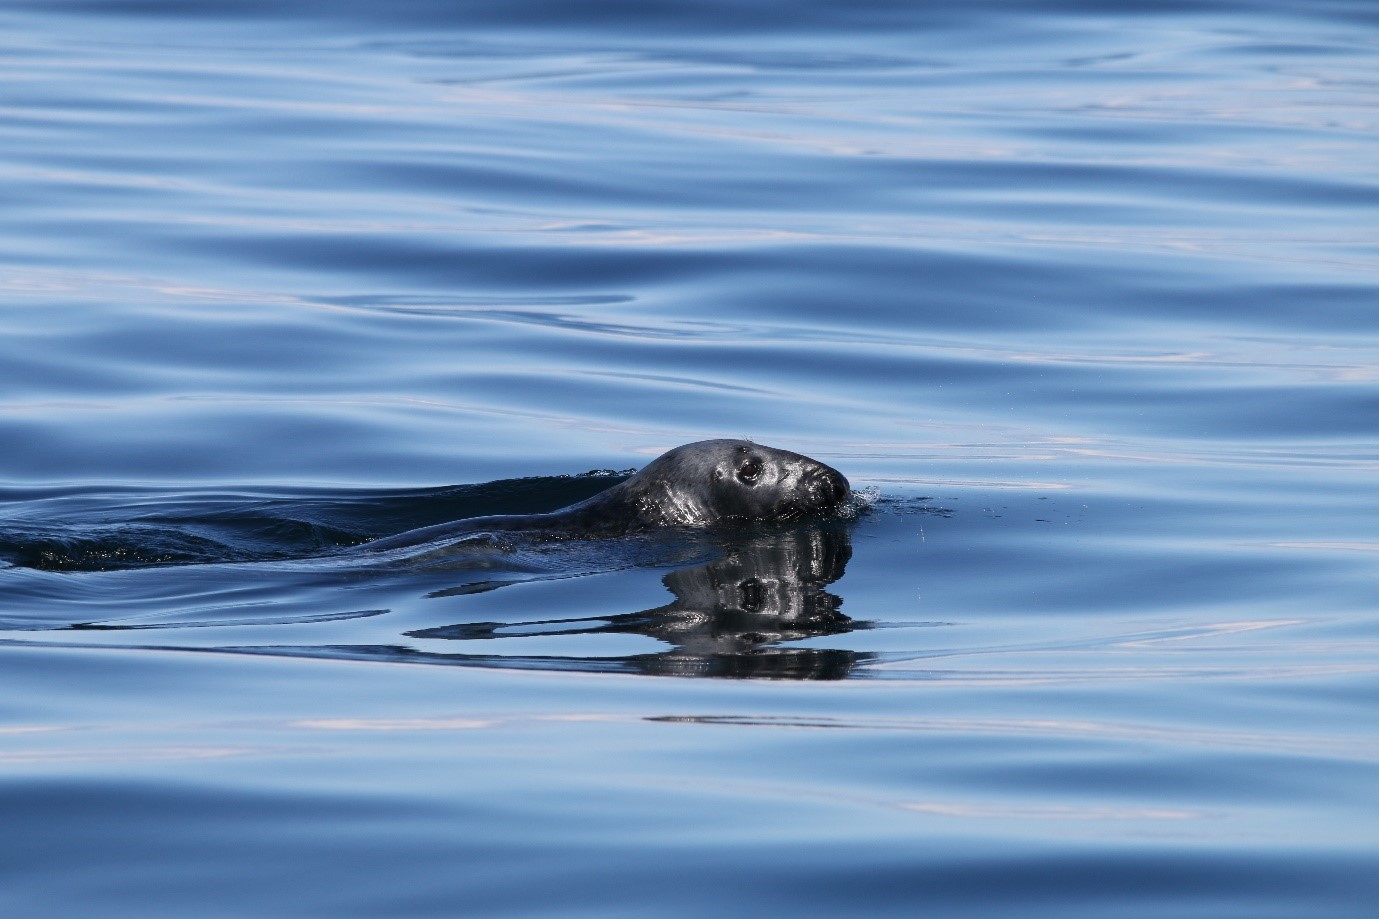 A grey seal, this species is only found in the Northern Atlantic